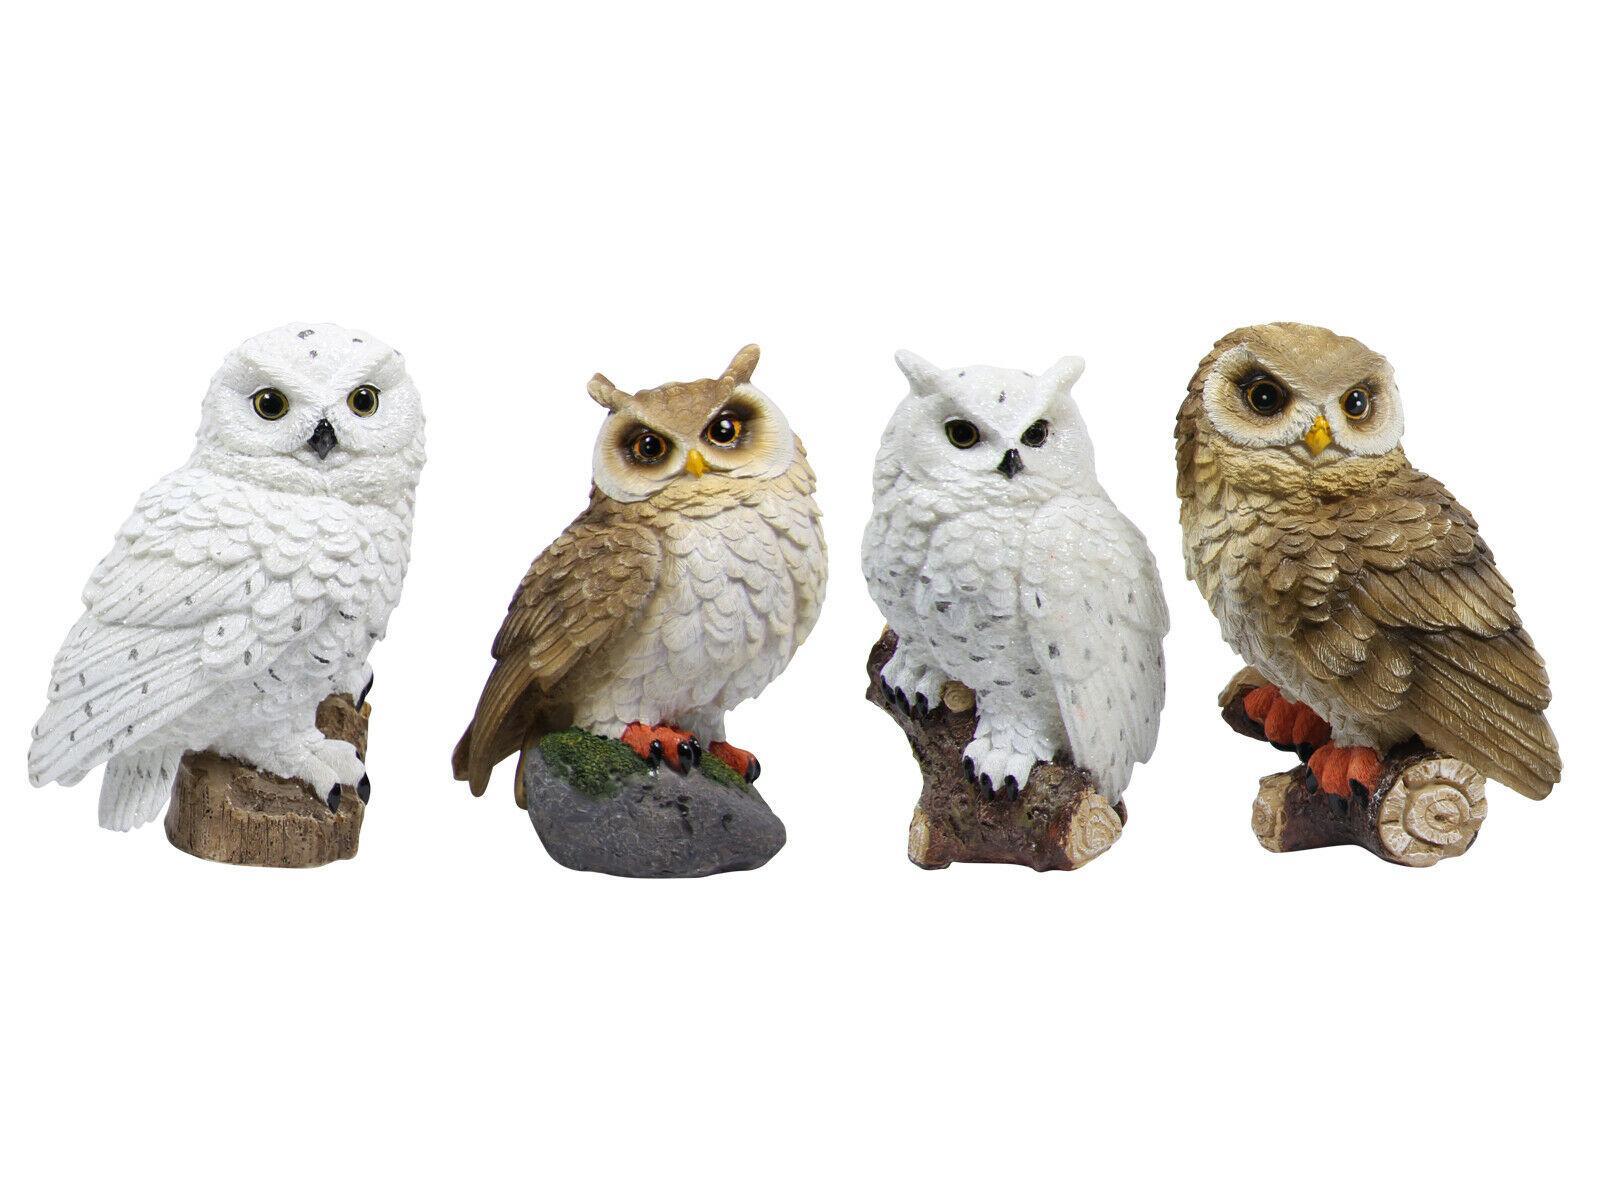 1pc 17cm Realistic Owl On Base Ornament Figurine Statues Garden Sculptures Gift